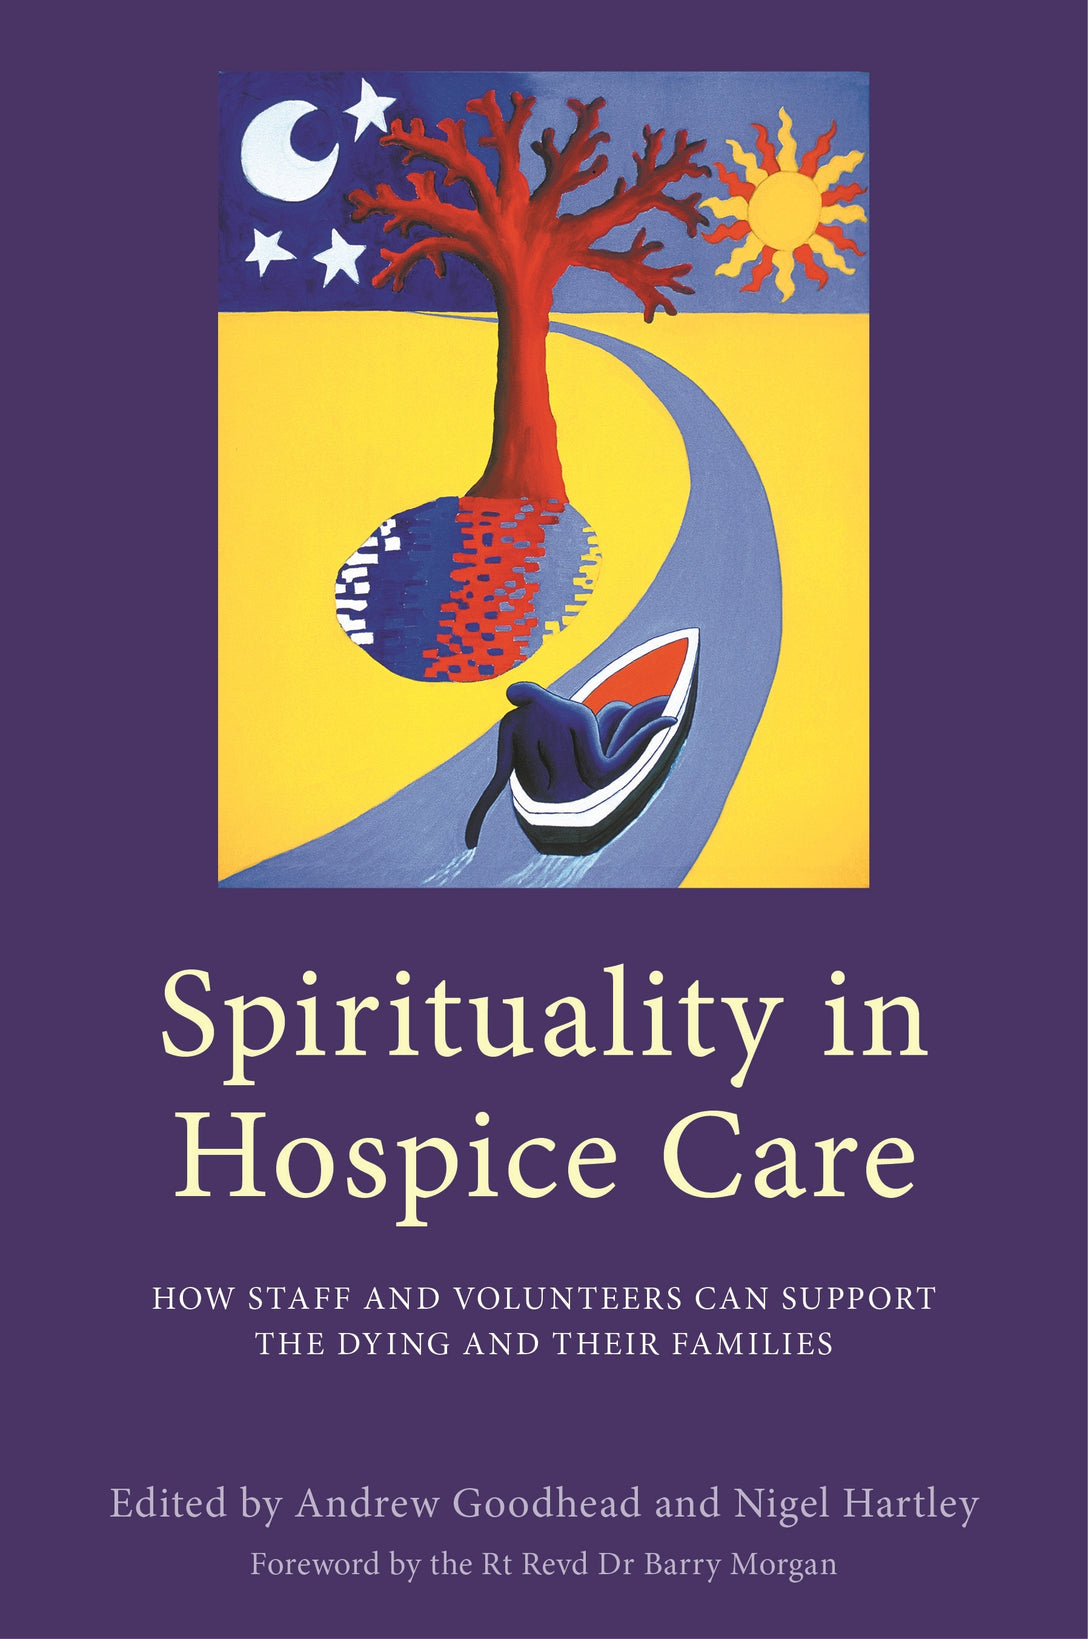 Spirituality in Hospice Care by Nigel Hartley, Andrew Goodhead, No Author Listed